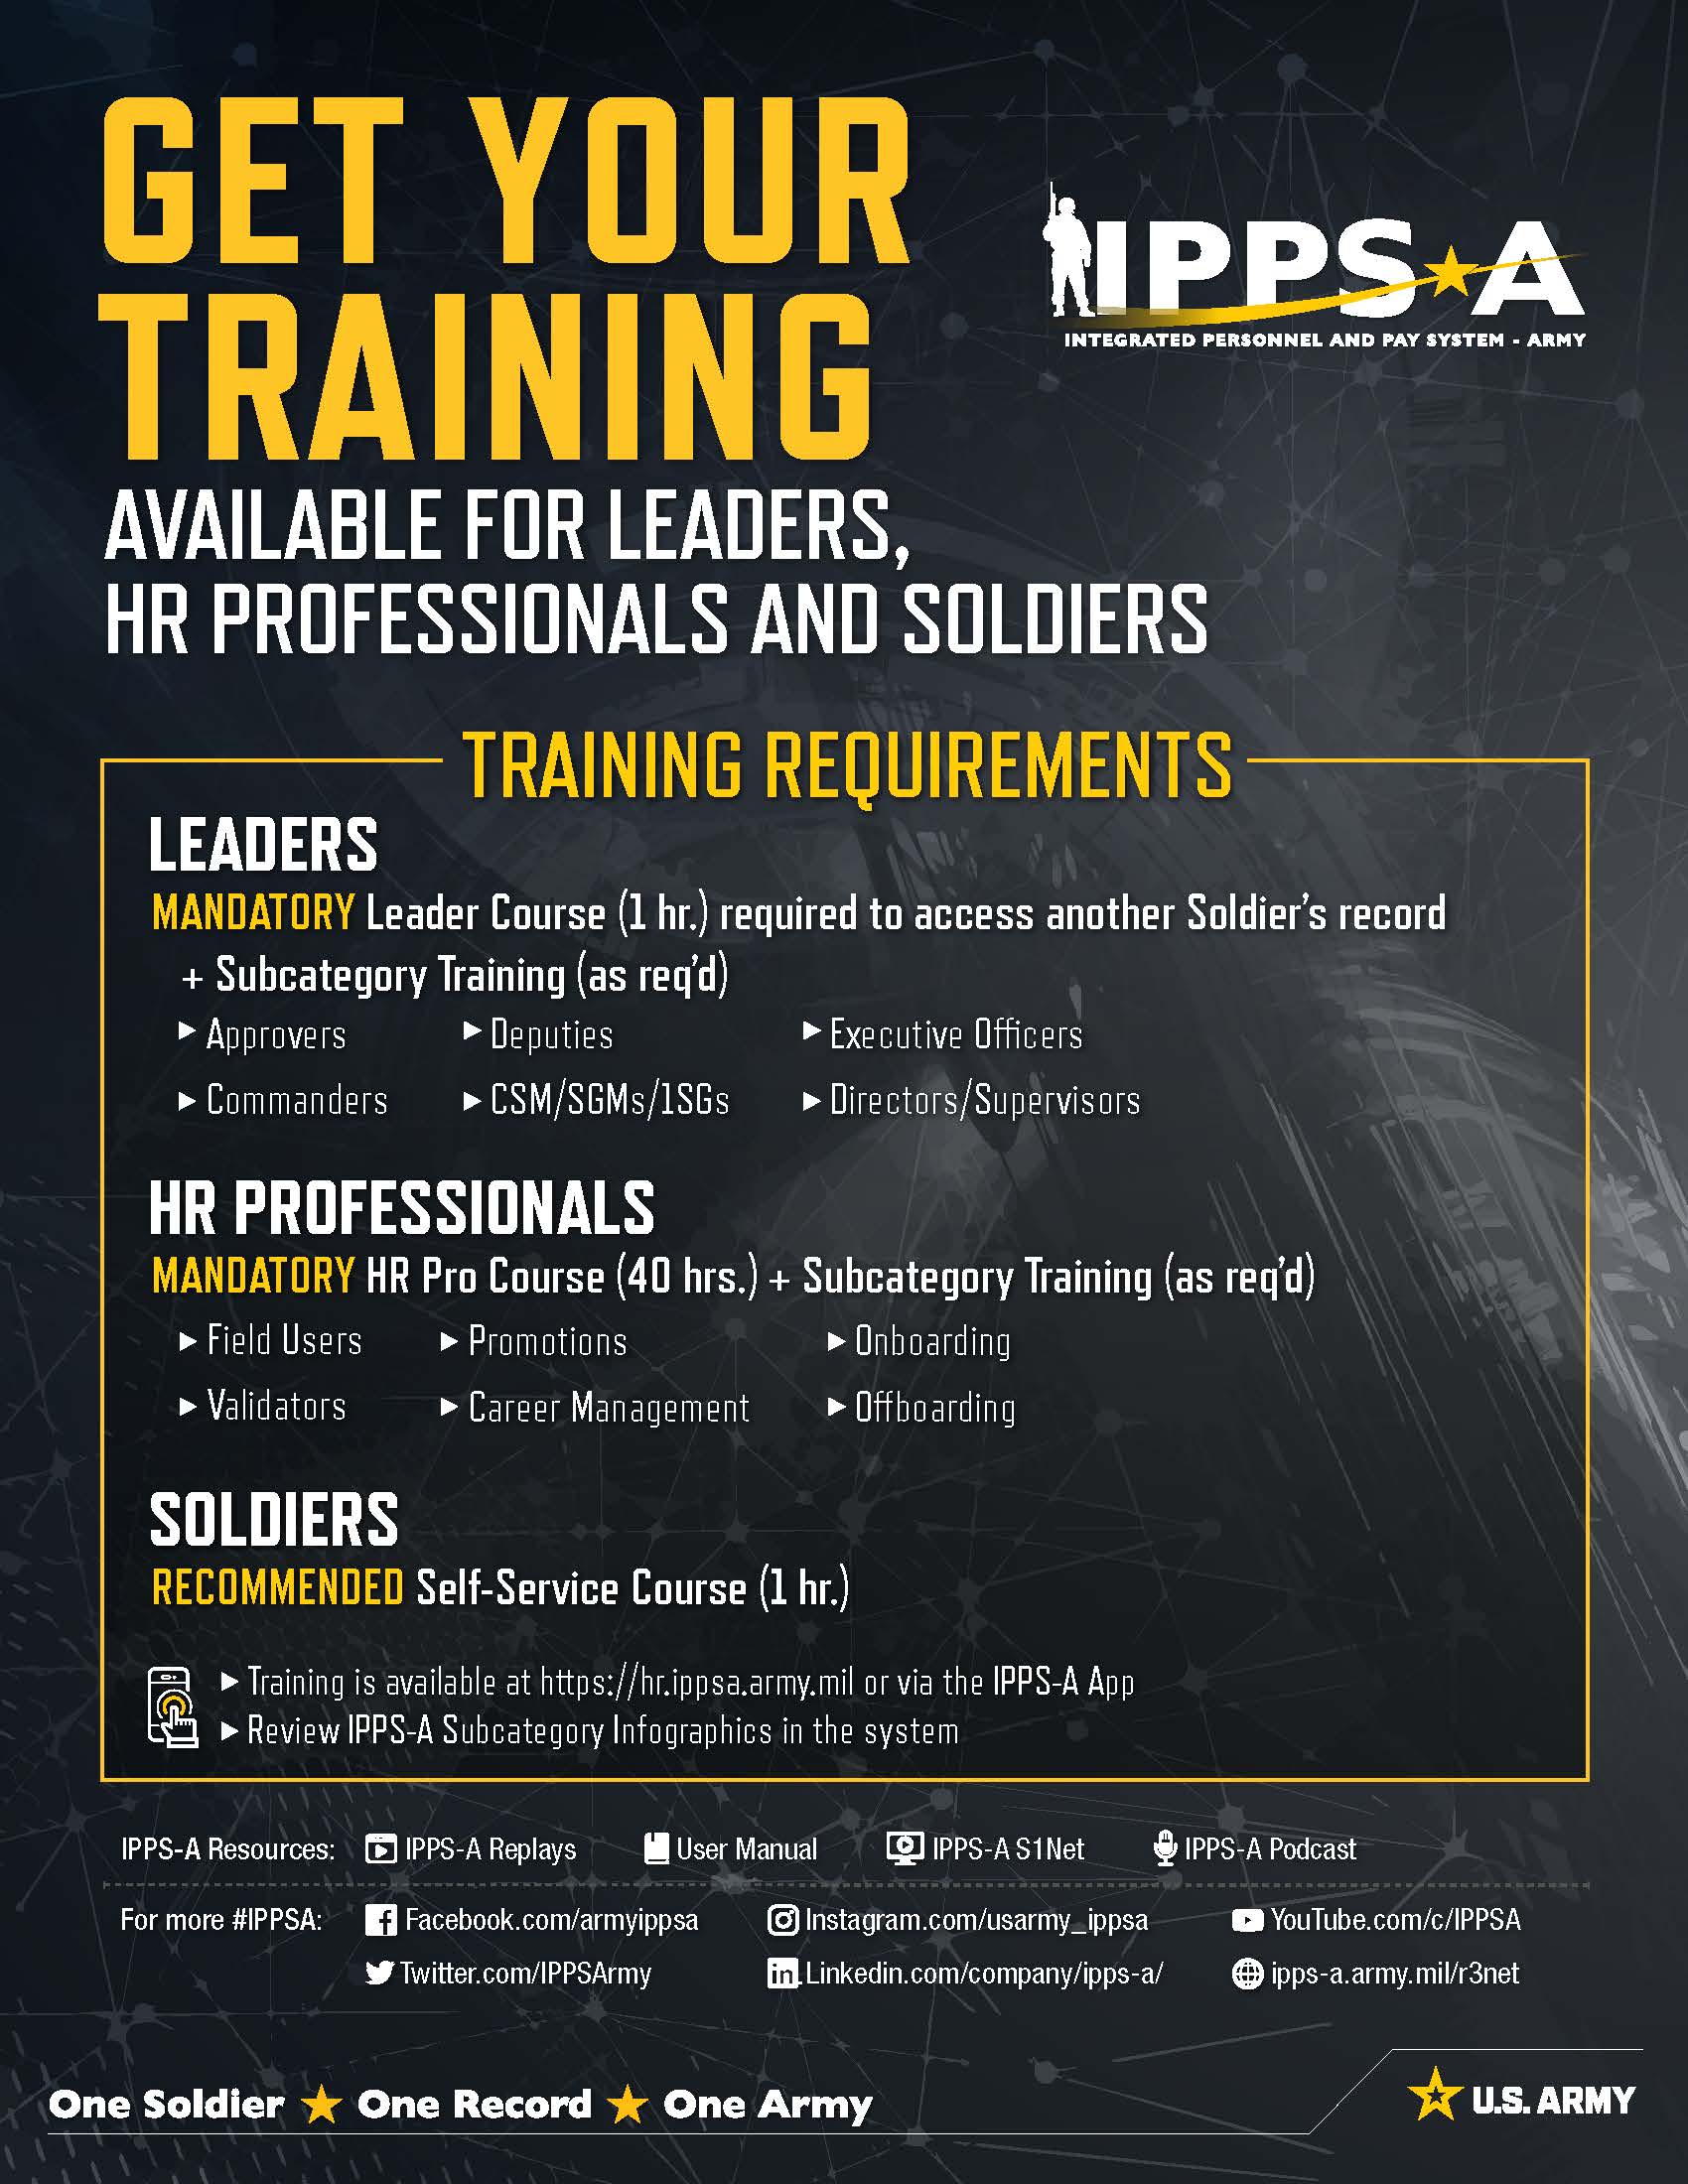 Required training informational poster